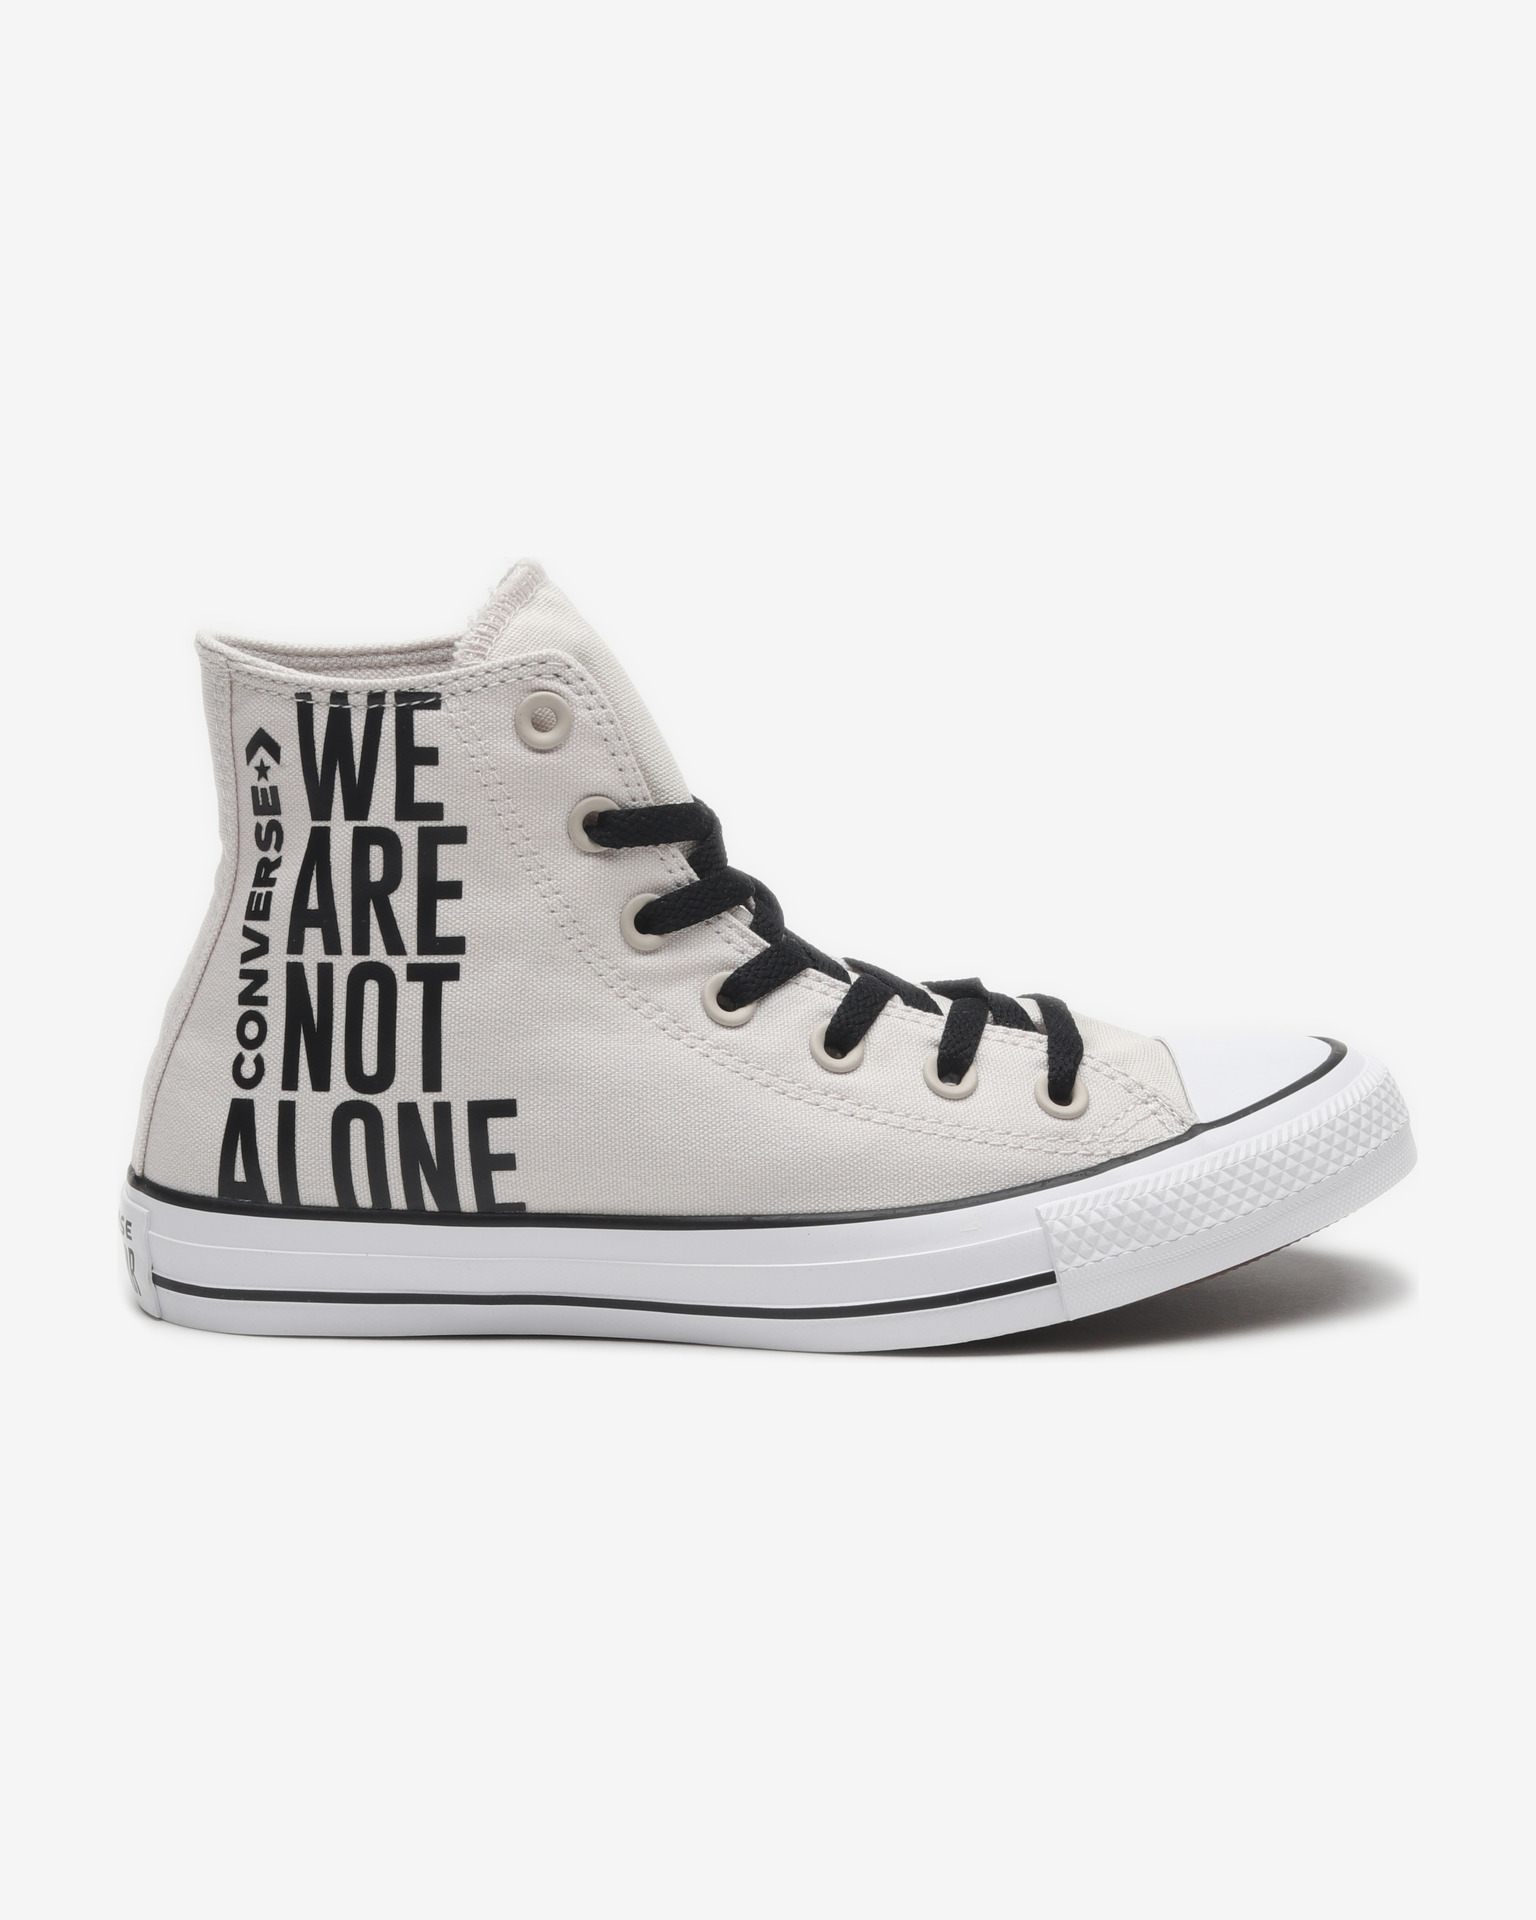 Converse - Chuck Taylor All Star We Are 